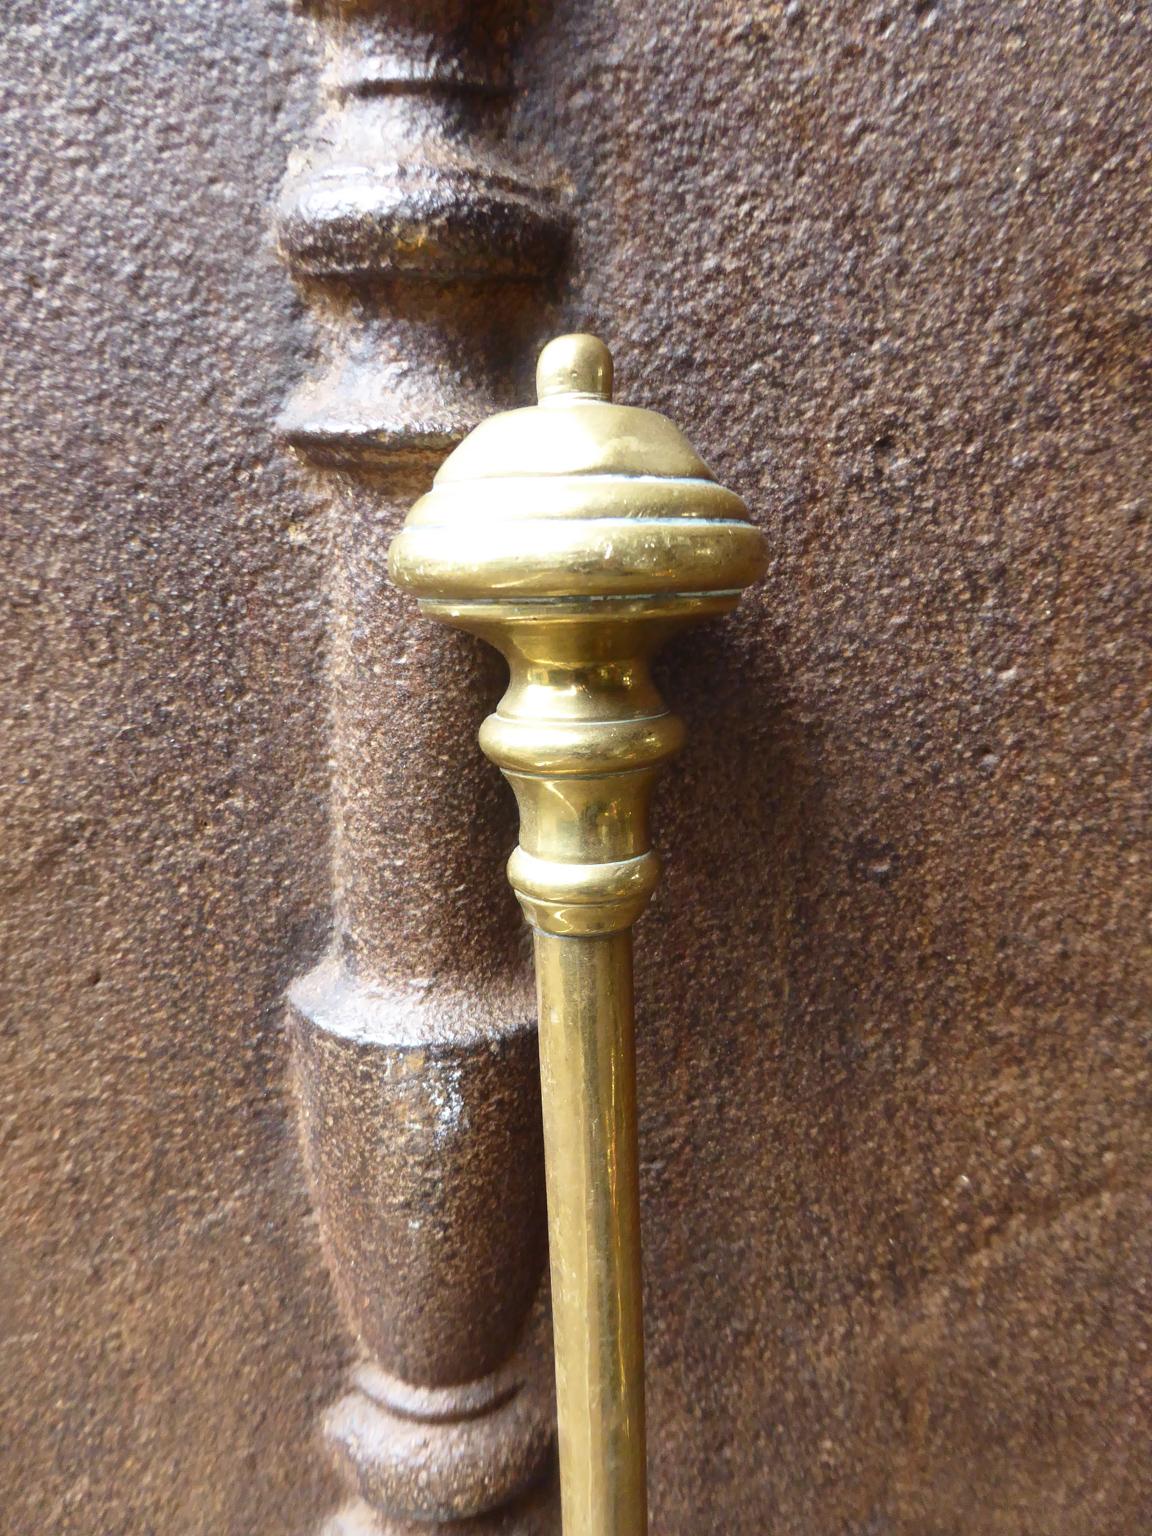 19th century English Victorian fireplace poker made of brass and wrought iron.







